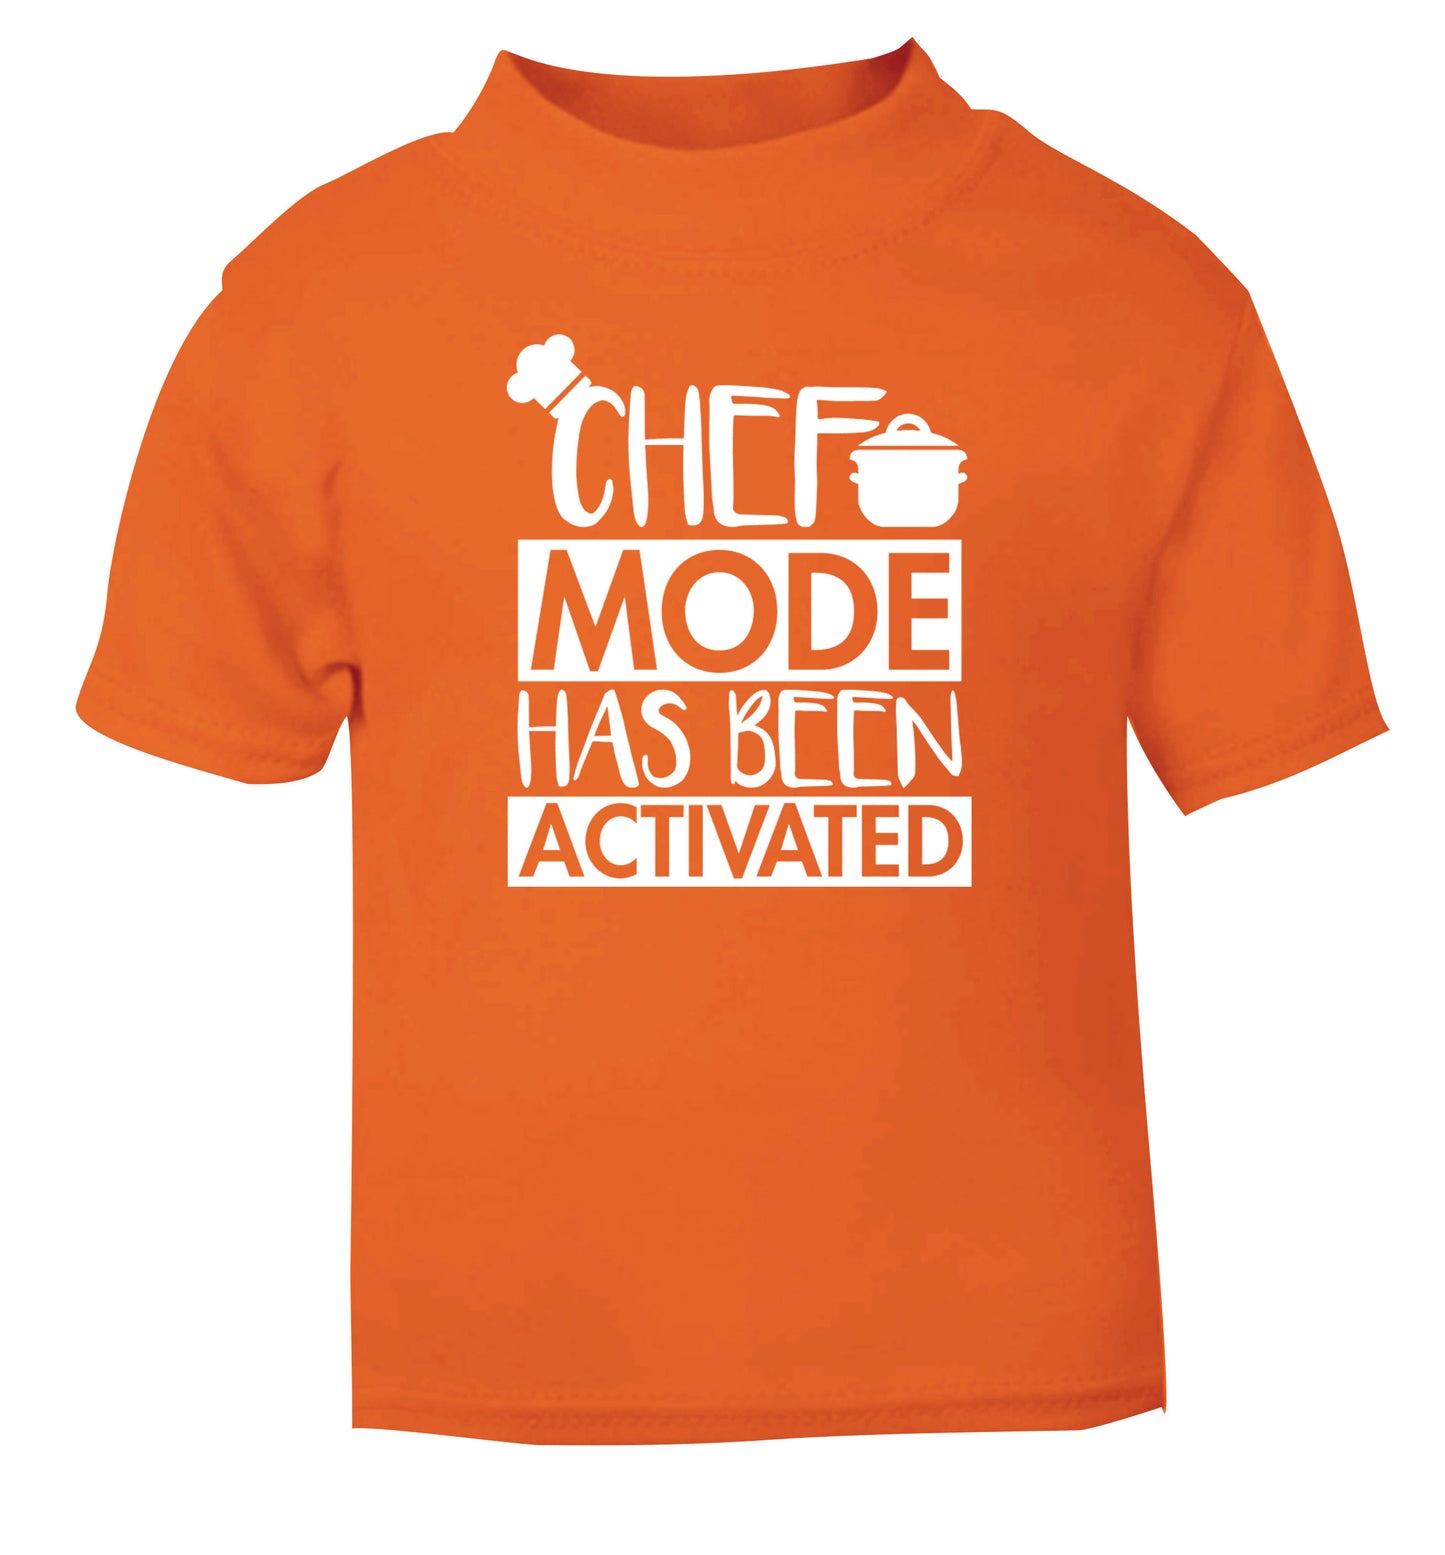 Chef mode has been activated orange Baby Toddler Tshirt 2 Years